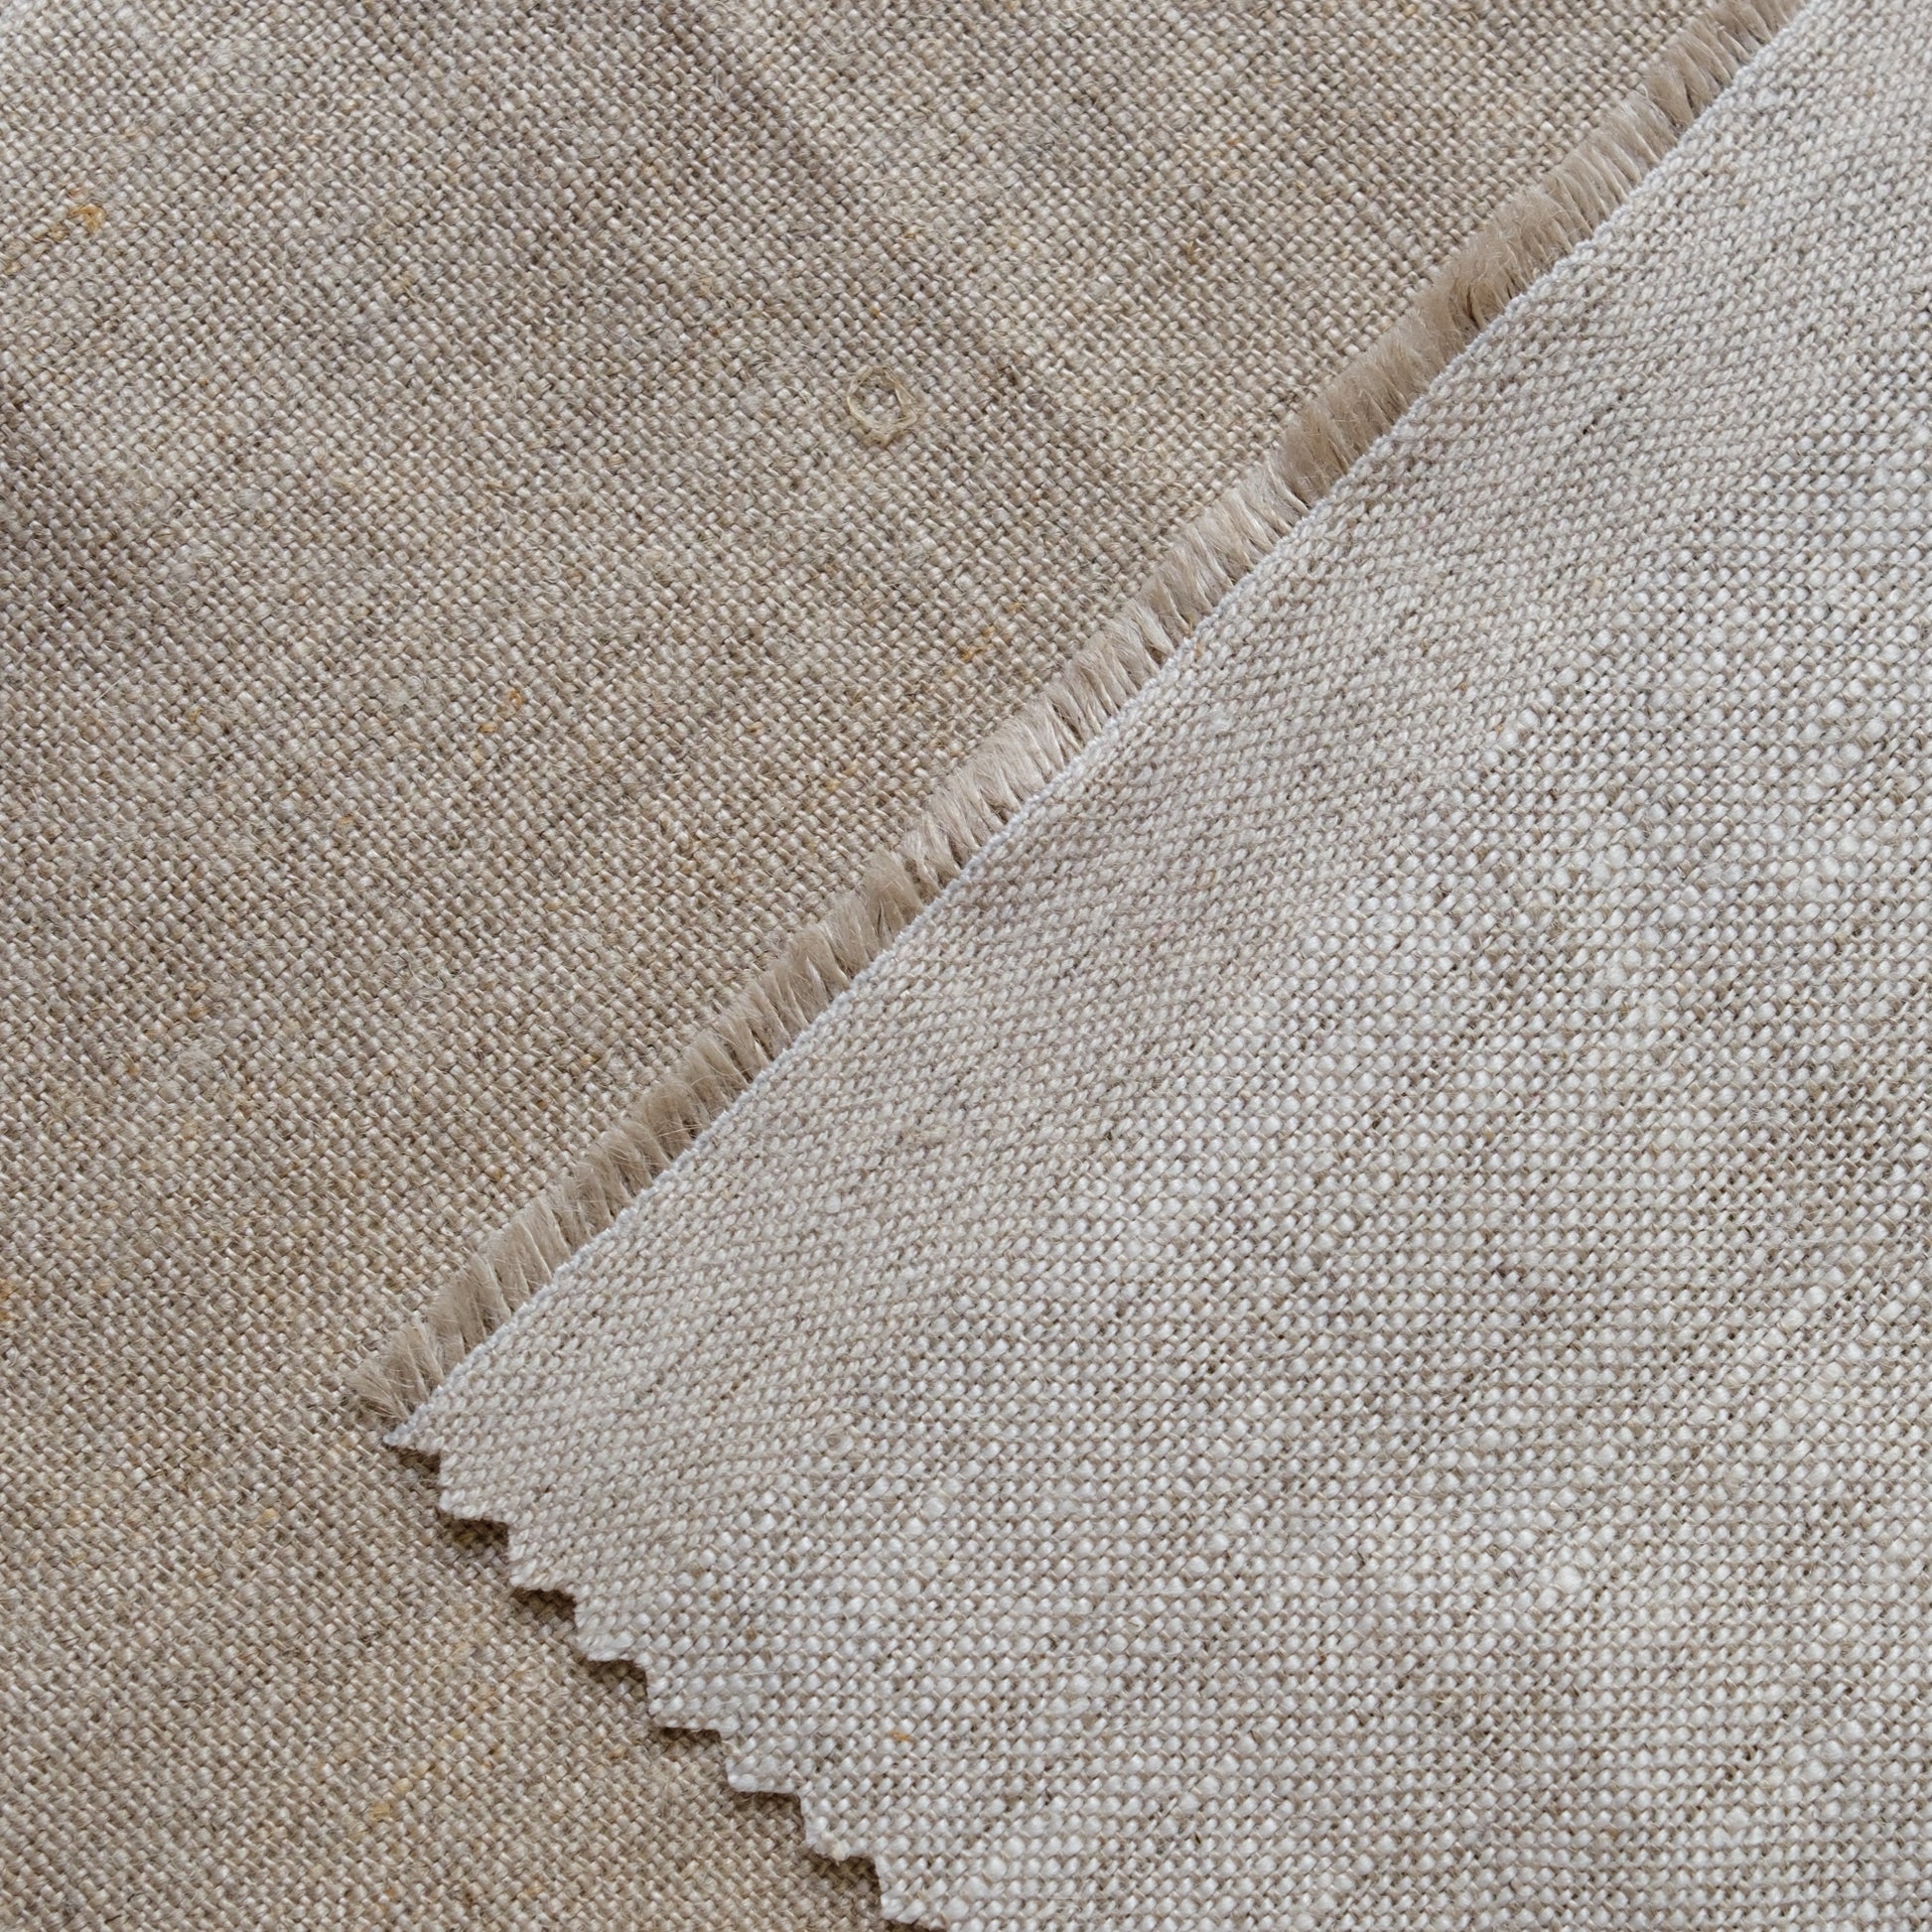 Linen oatmeal and flax